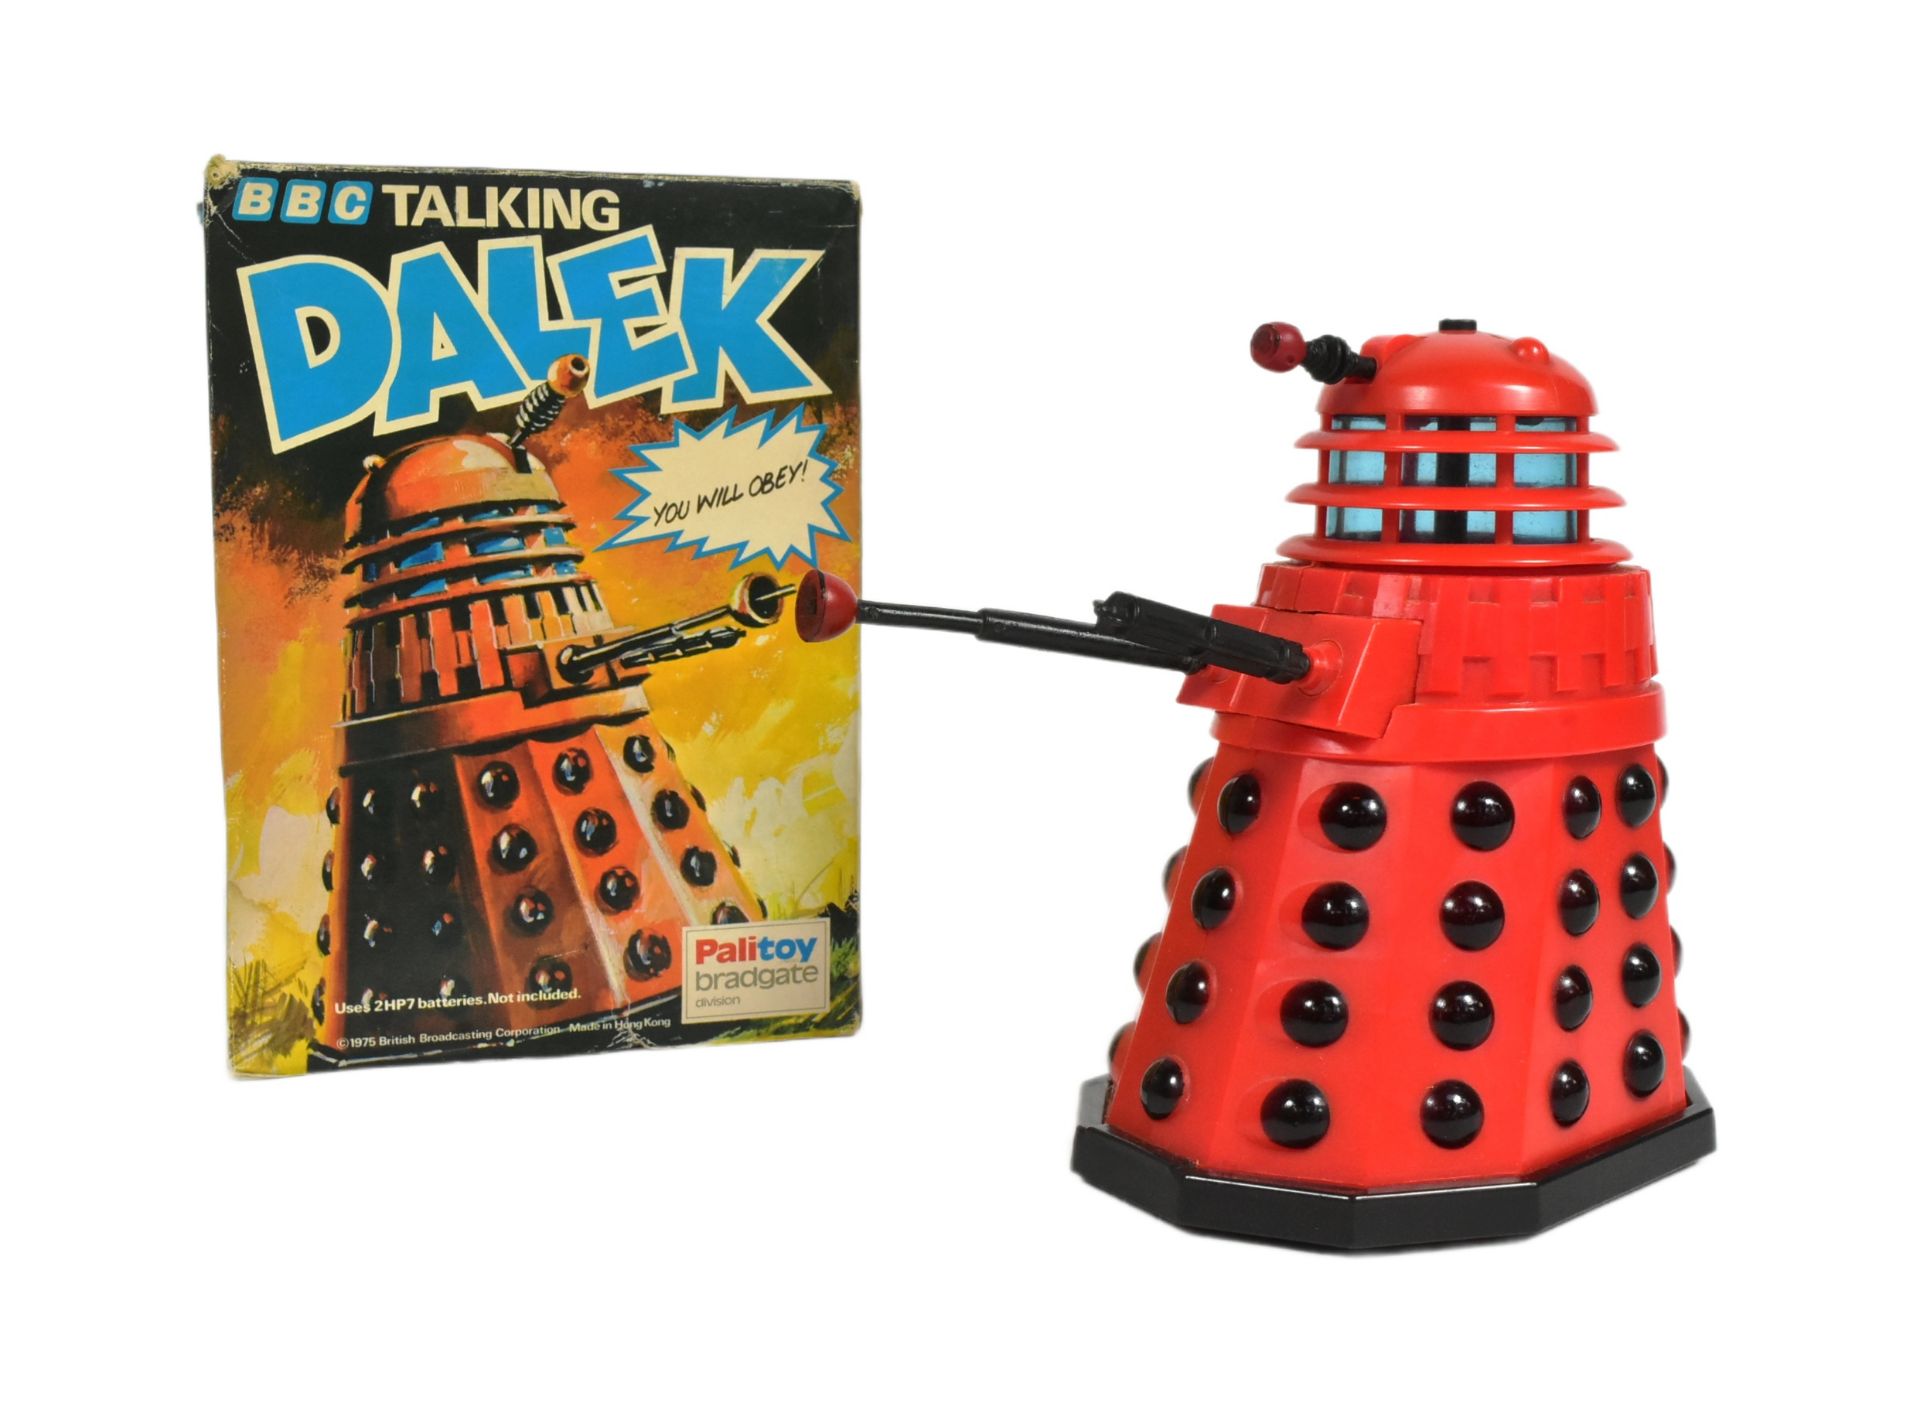 DOCTOR WHO - VINTAGE BBC TALKING DALEK TOY BY PALITOY